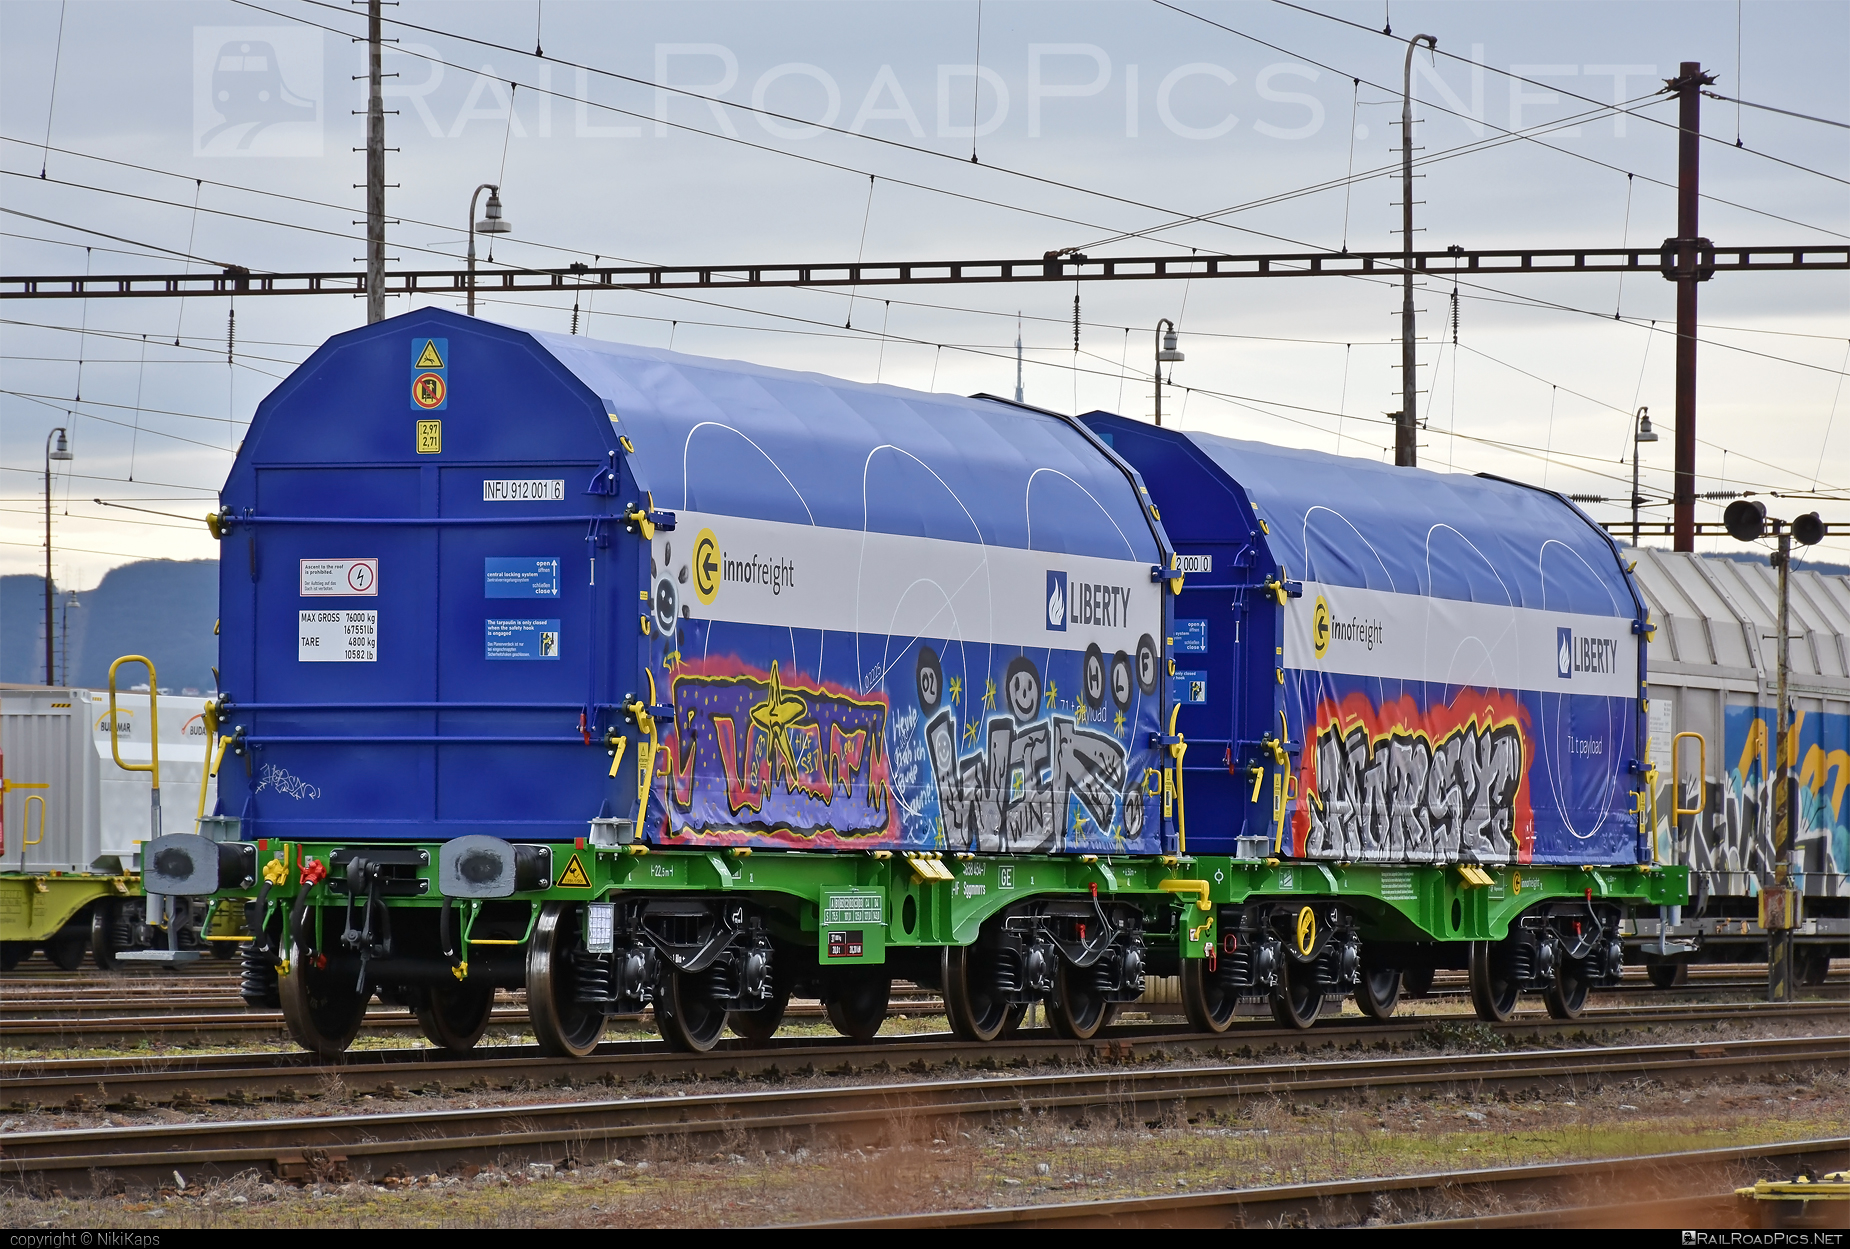 Class S - Sggmmrrs - 4658 454-7 operated by Innofreight Solutions GmbH #InnofreightSolutions #InnofreightSolutionsGmbH #graffiti #innofreight #sggmmrrs